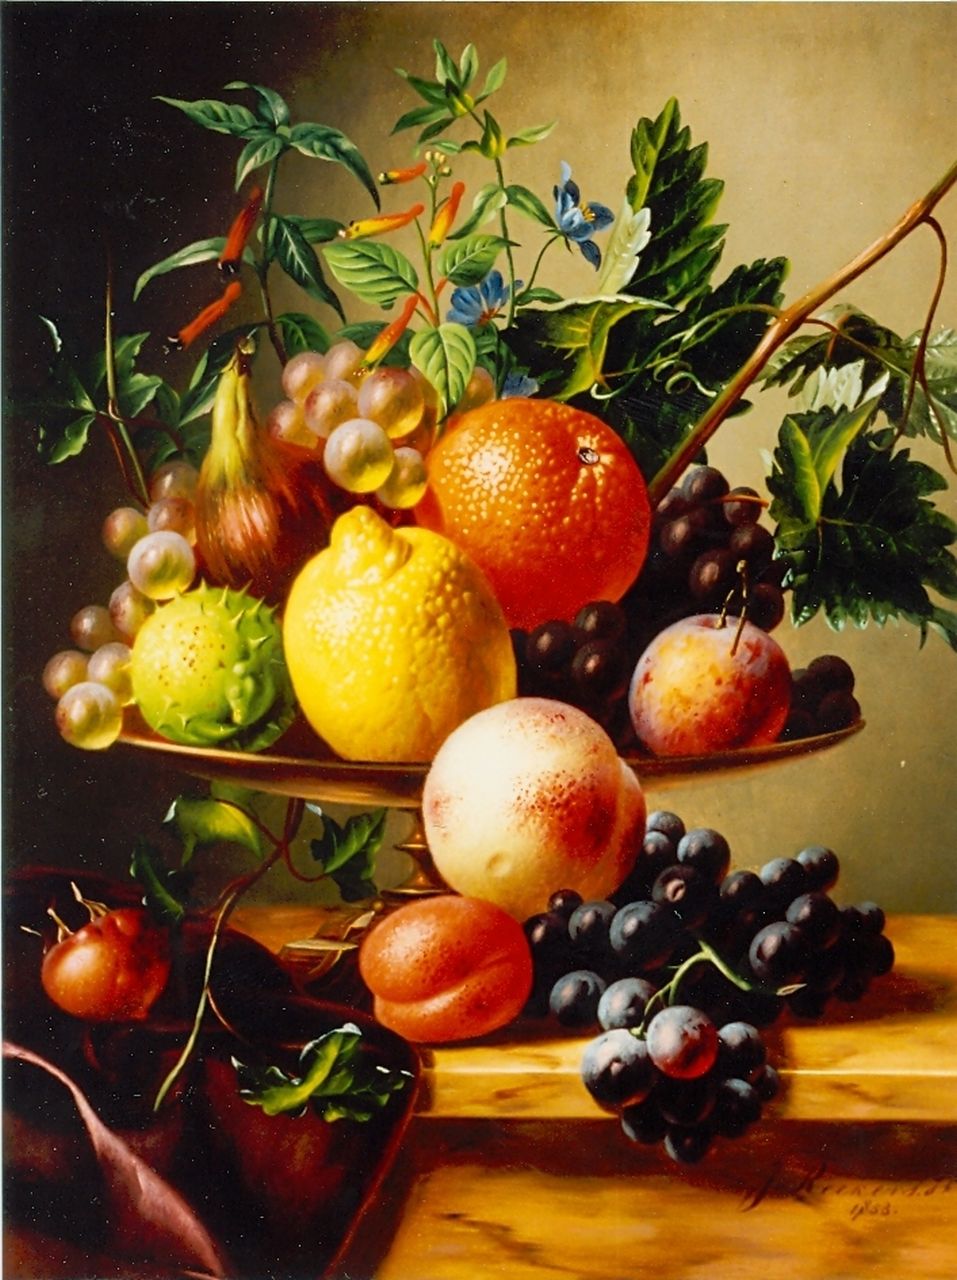 Reekers jr. Joh.  | Johannes Reekers jr., A still life with a lemon, peach and grapes, oil on panel 43.7 x 34.2 cm, signed l.r. and dated 1853